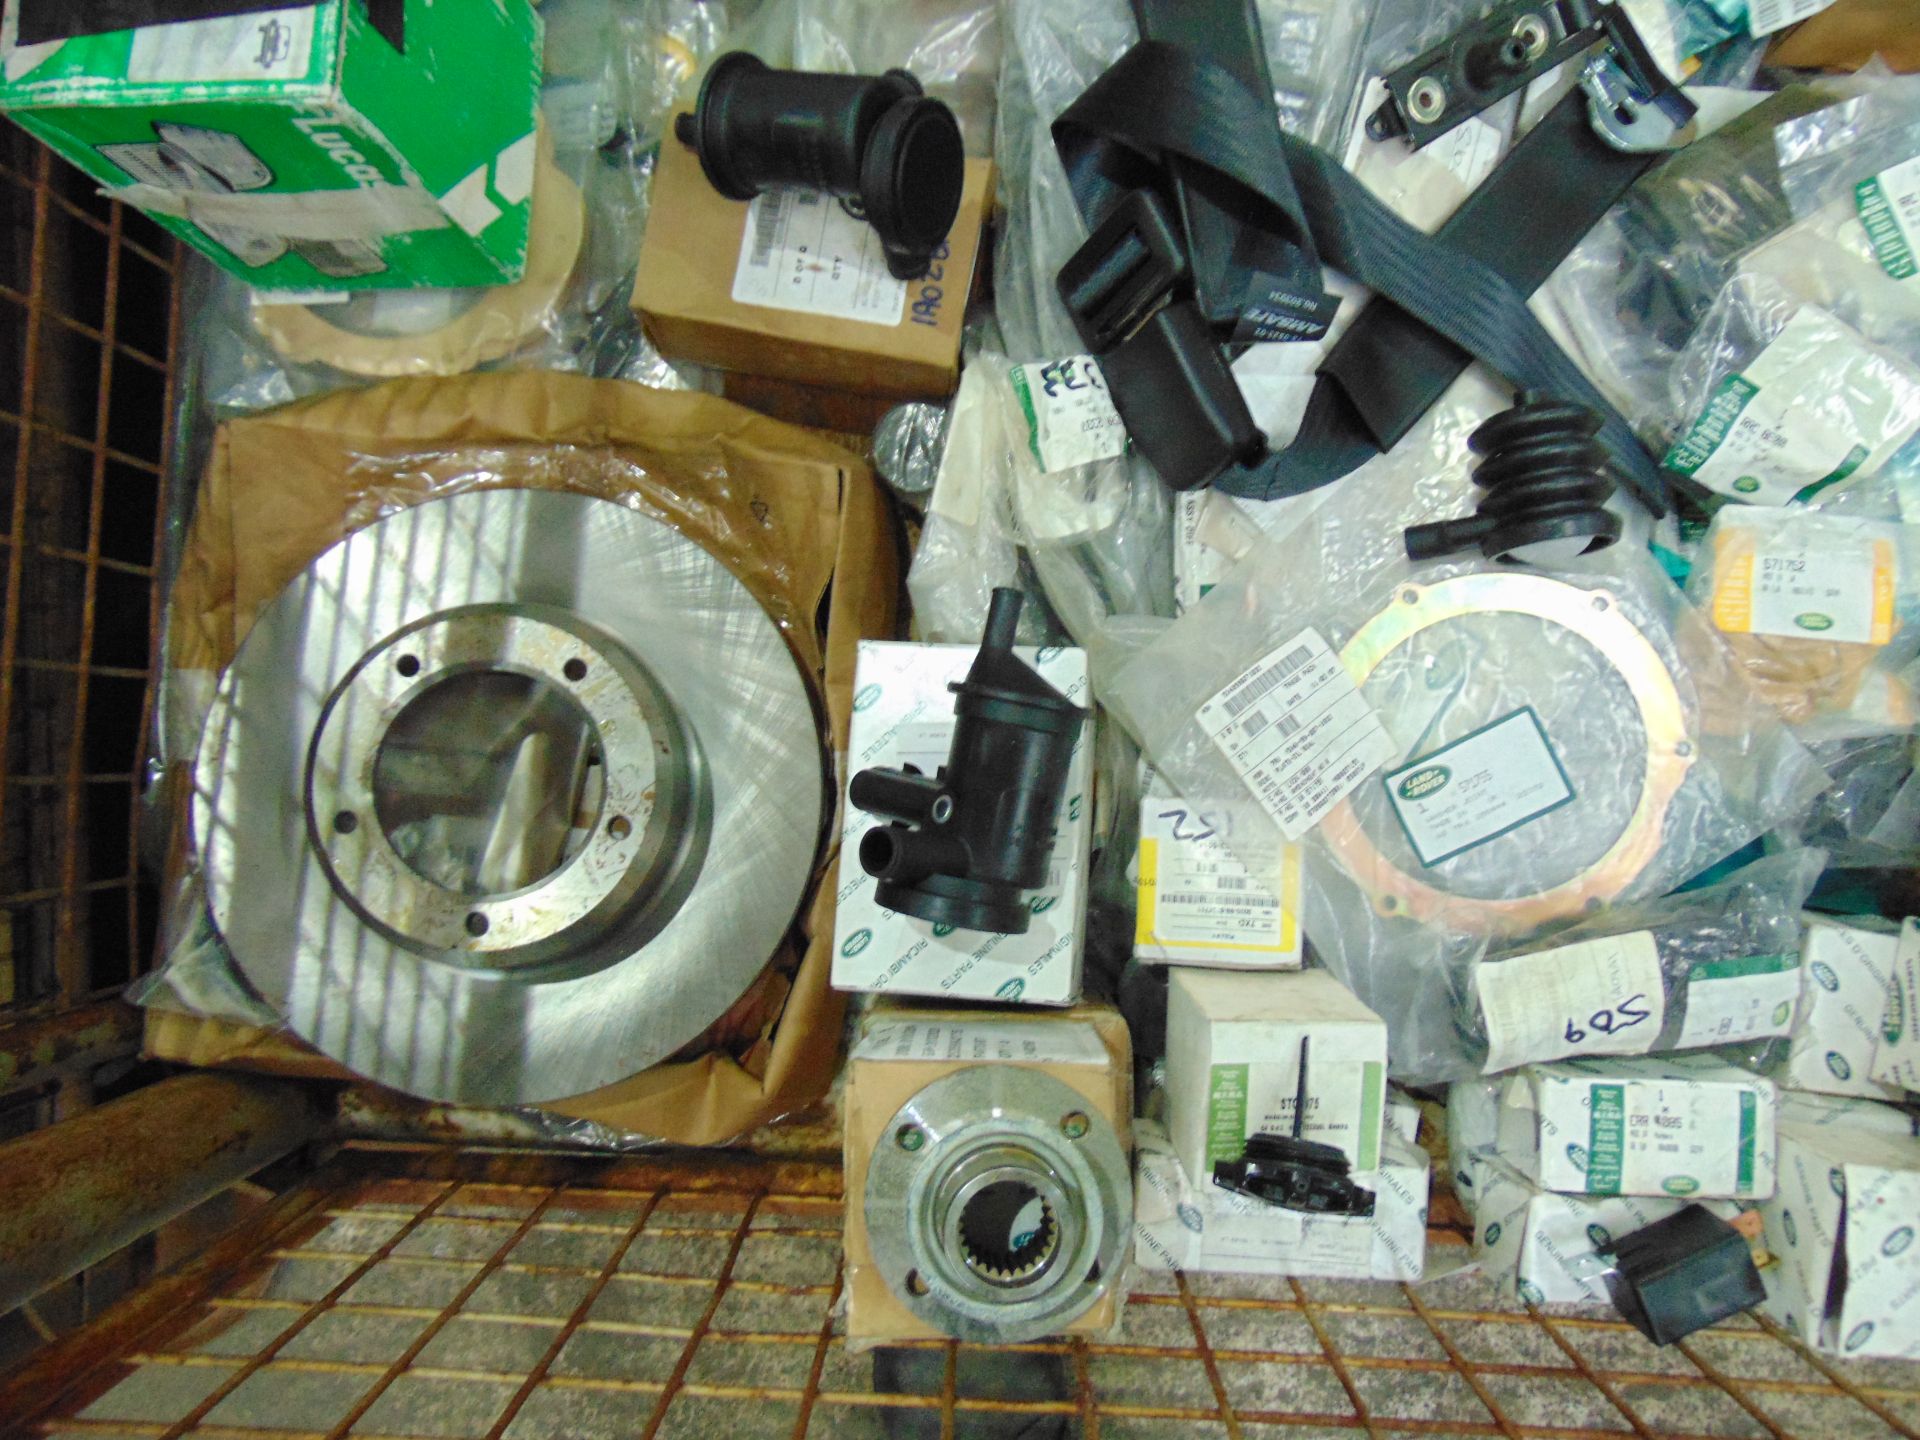 Mixed Stillage of Land Rover Parts - Image 3 of 8